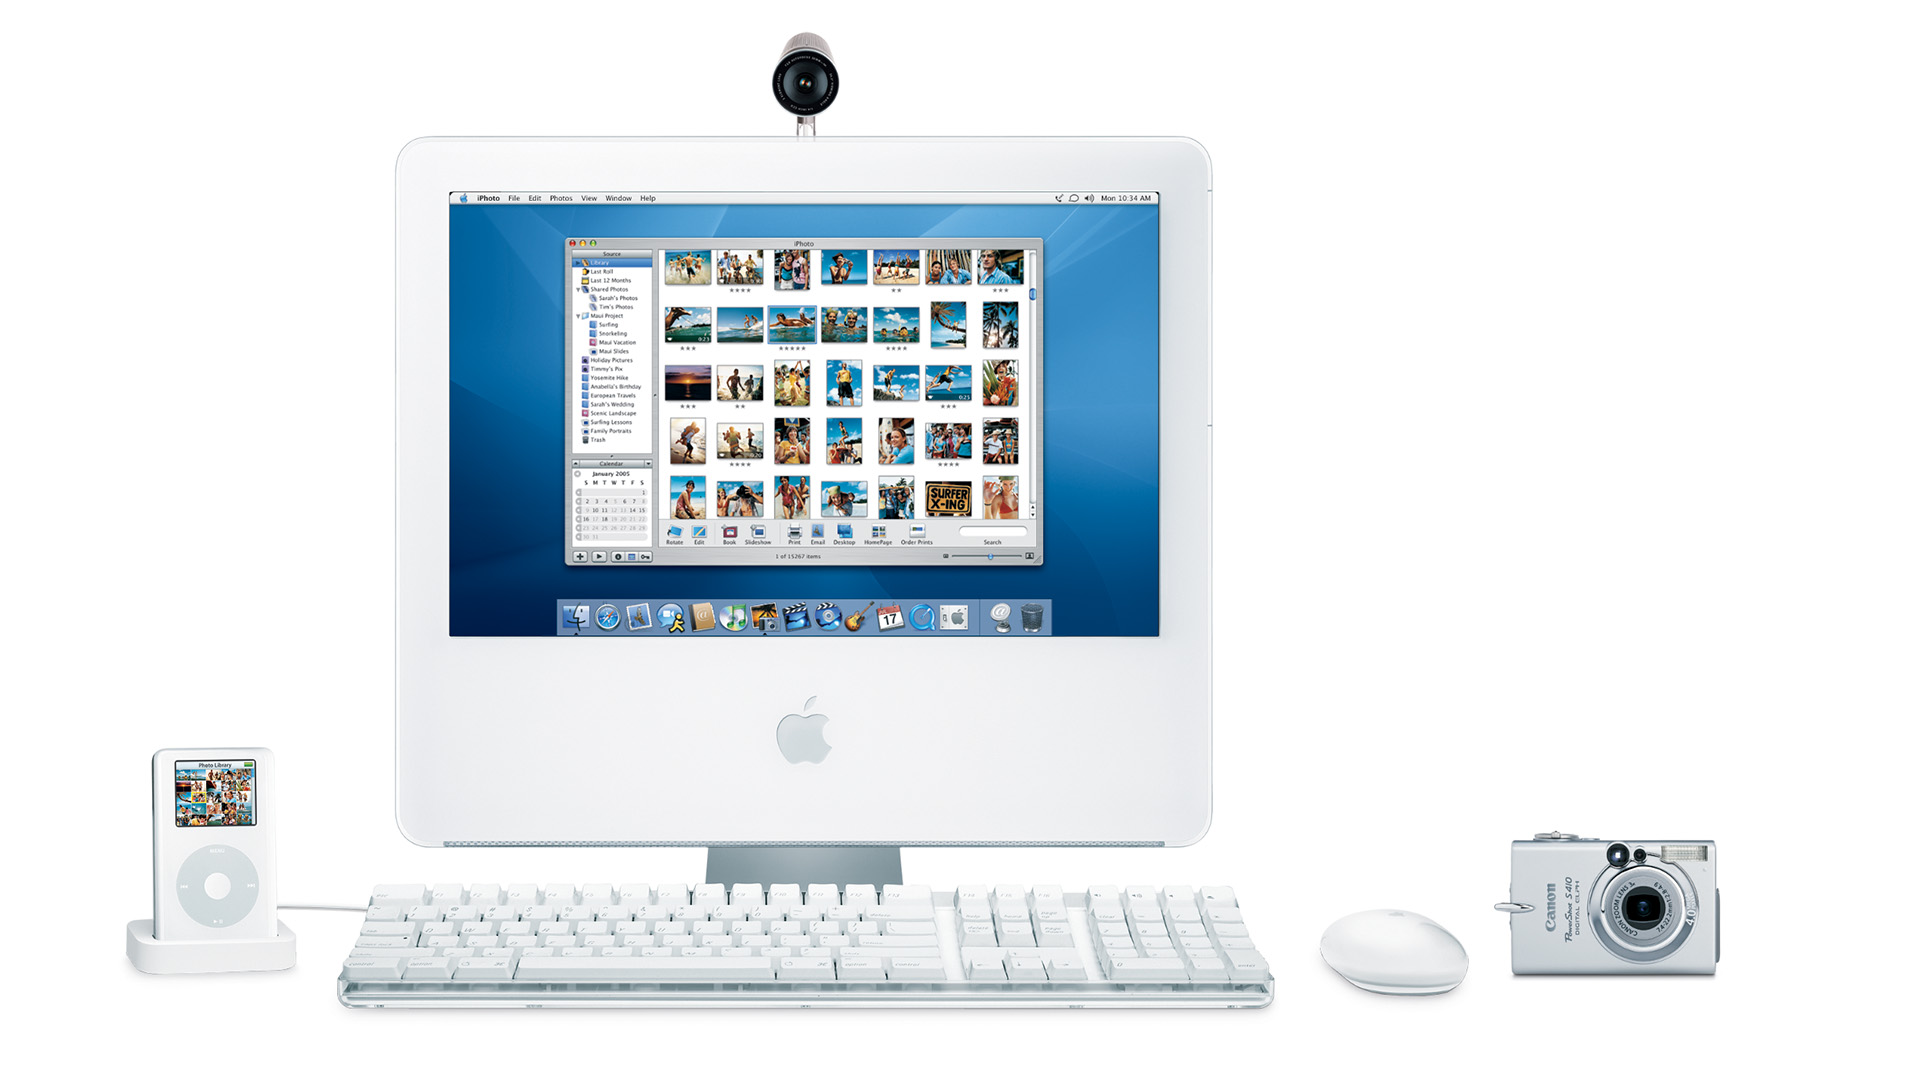 The 23-years long history of iMac's design - Domus